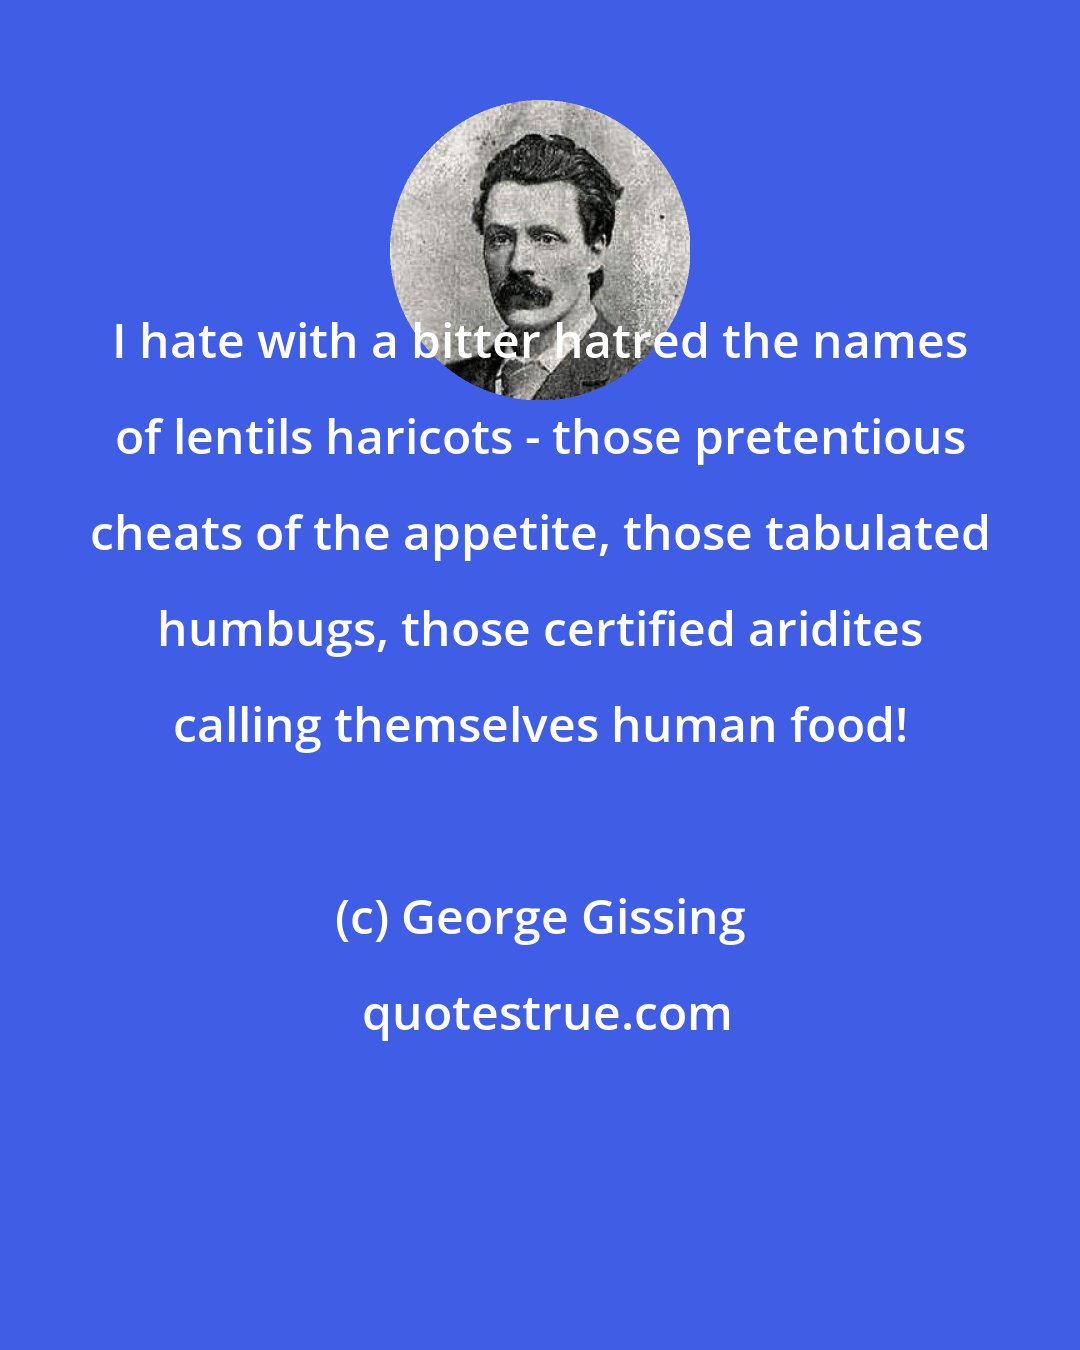 George Gissing: I hate with a bitter hatred the names of lentils haricots - those pretentious cheats of the appetite, those tabulated humbugs, those certified aridites calling themselves human food!